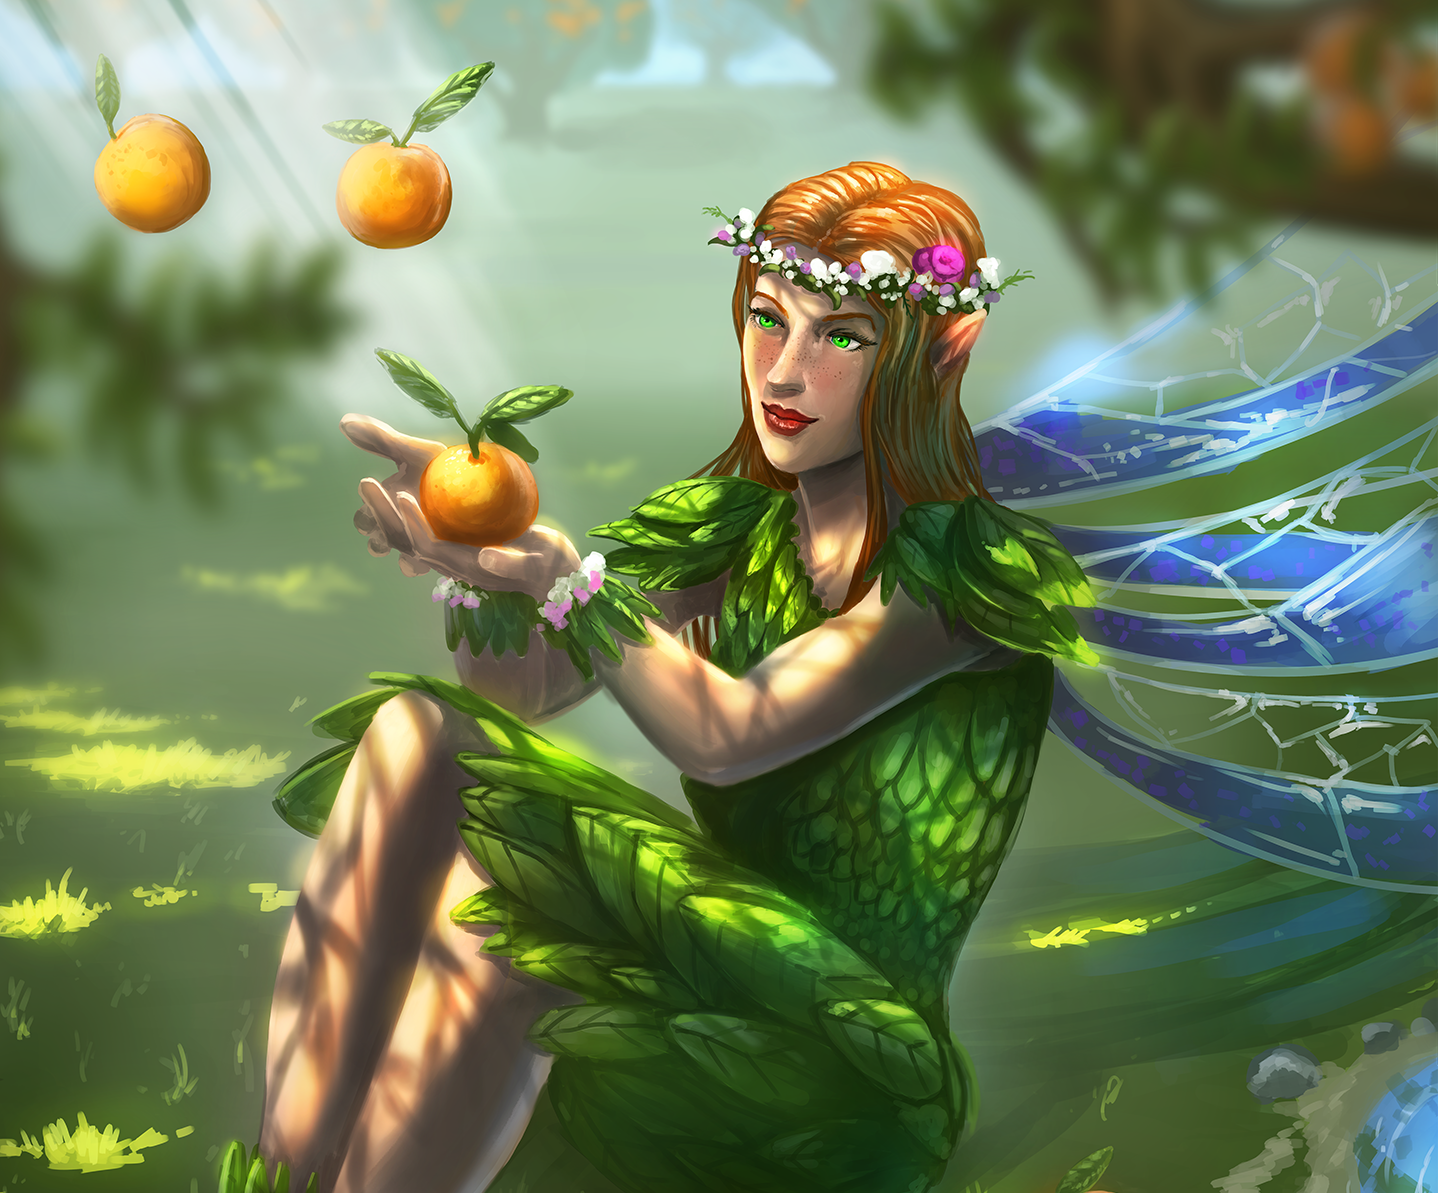 The Magic of Water Fairy with Oranges found by Highway.